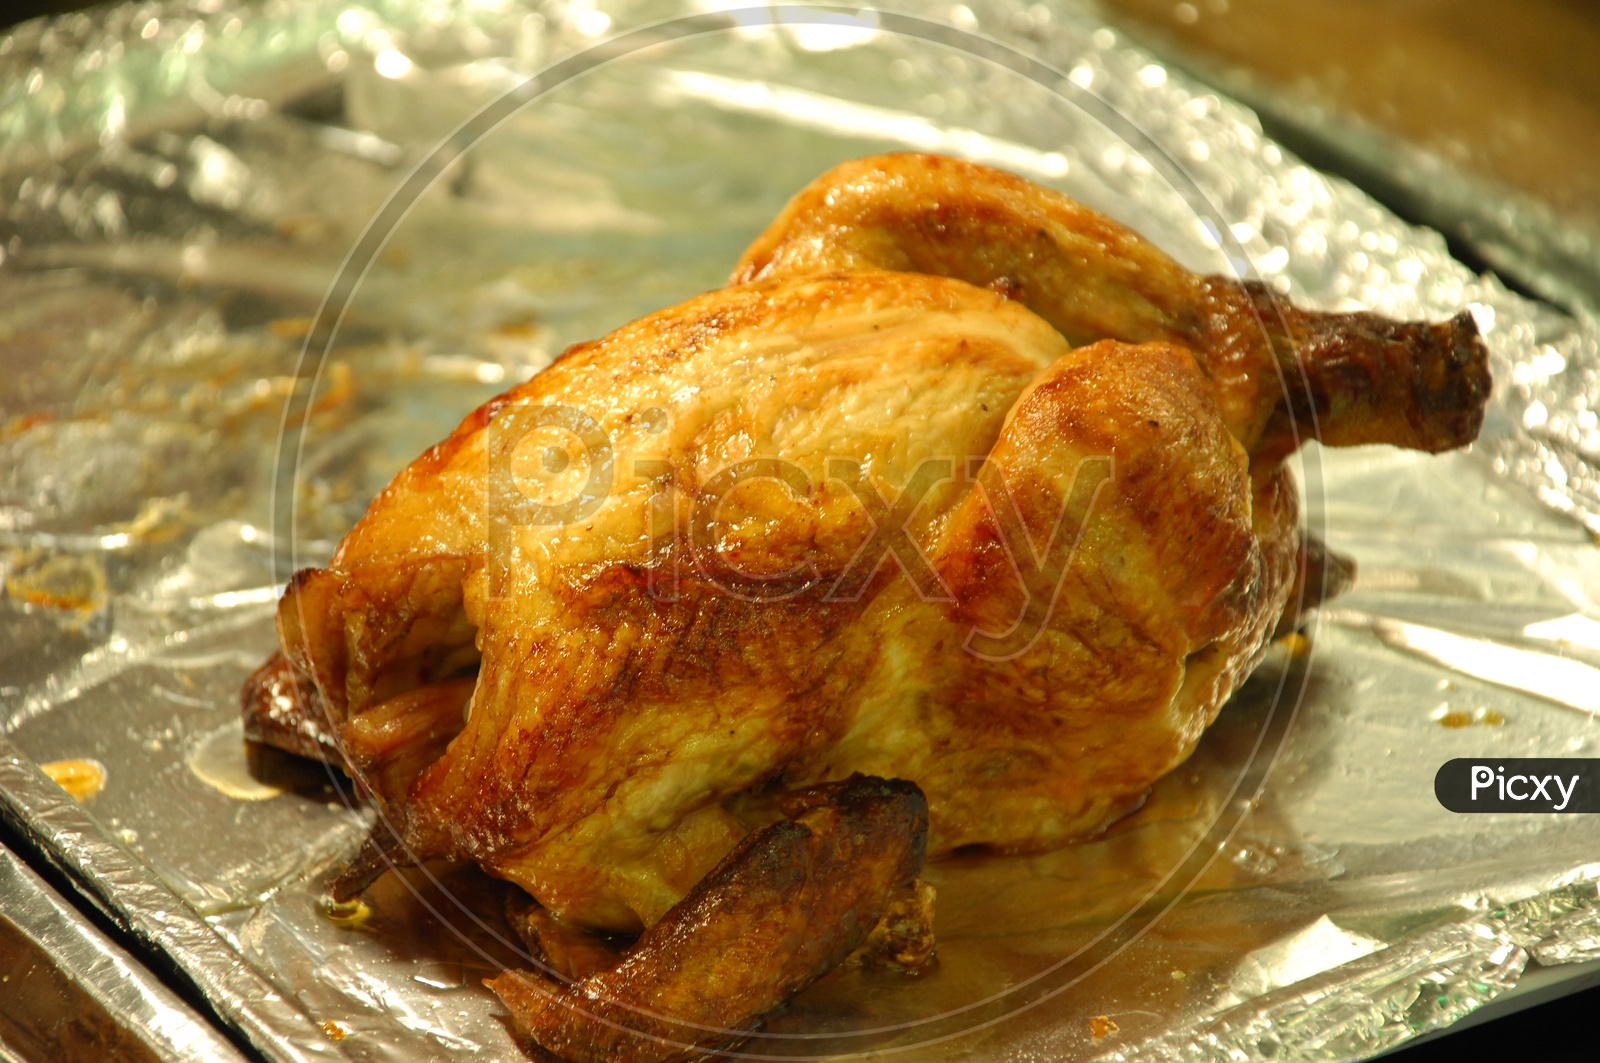 Roasted turkey placed on an aluminum foil lined tray